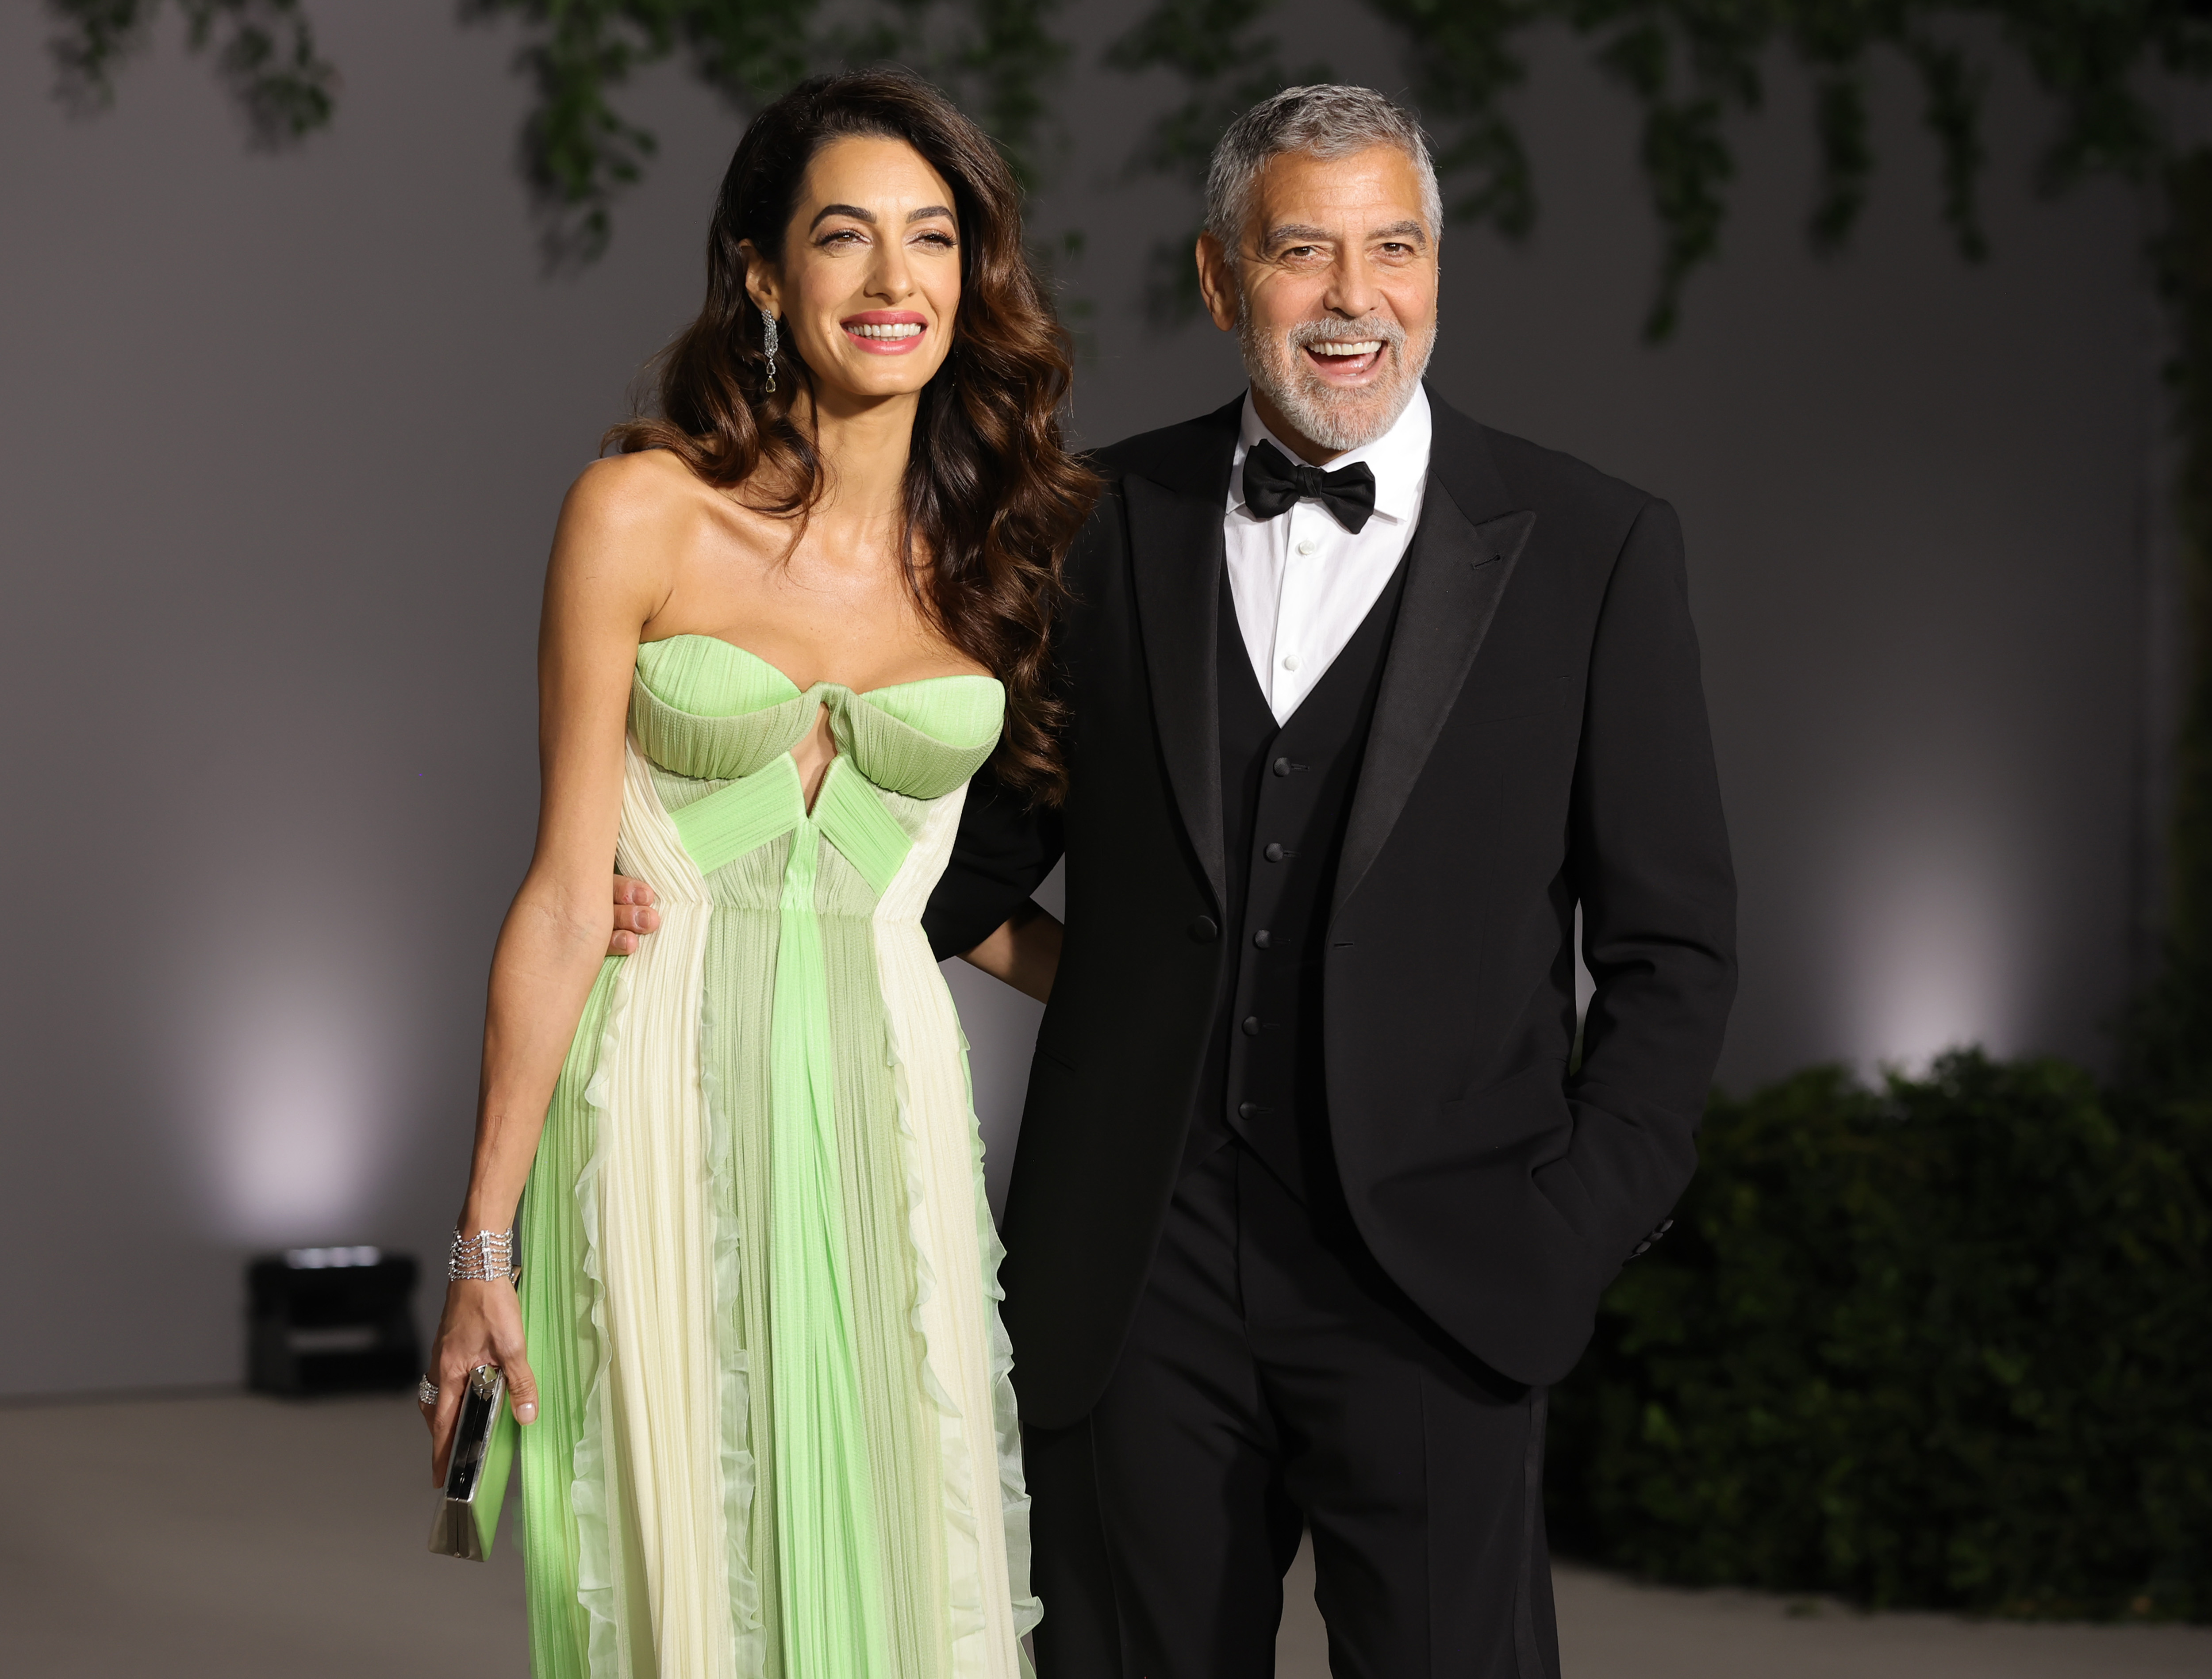 Amal Clooney and George Clooney in Los Angeles, California on October 15, 2022 | Source: Getty Images